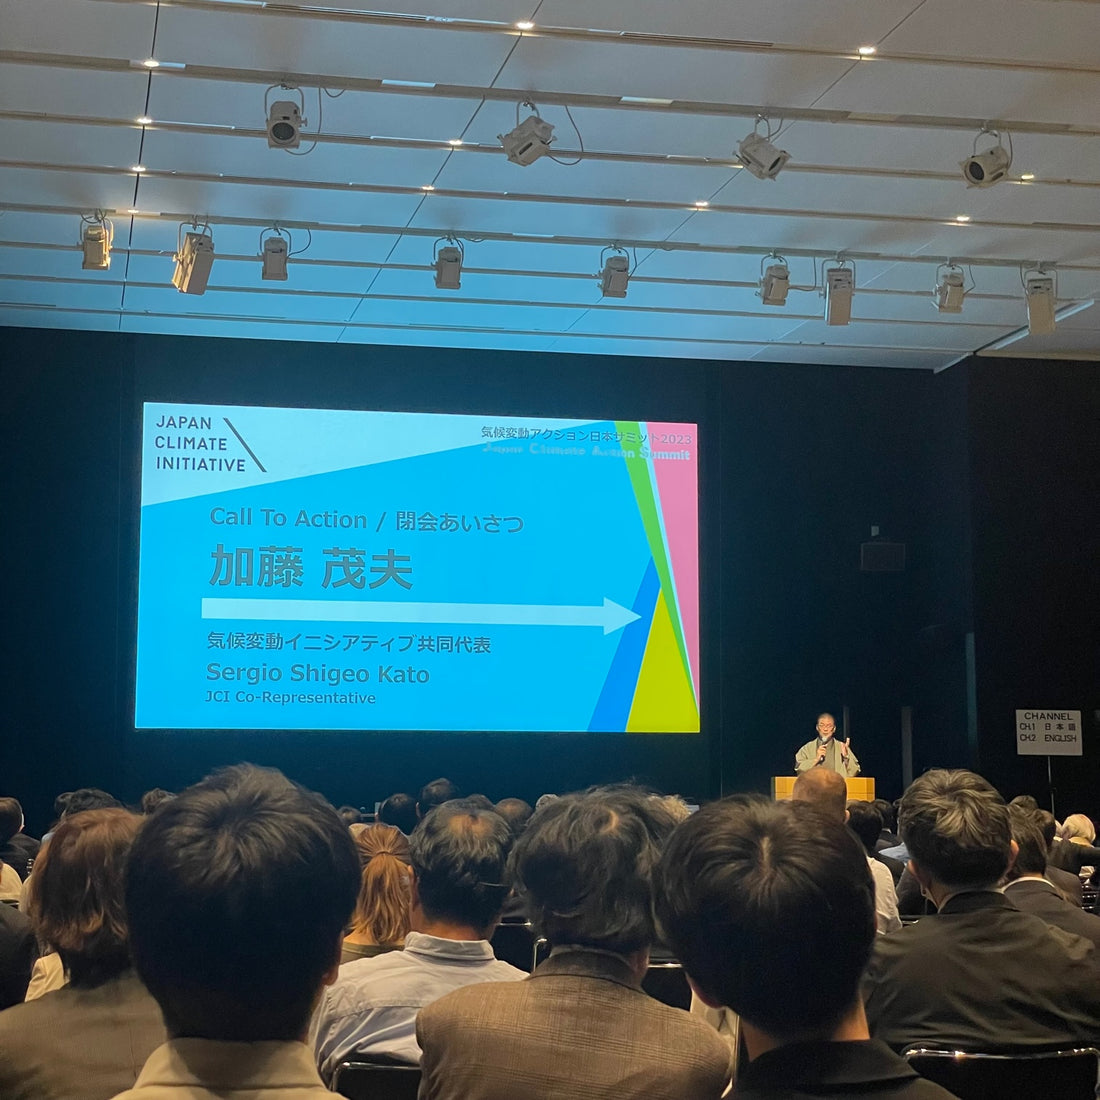 Attended the Japan Climate Action Summit 2023